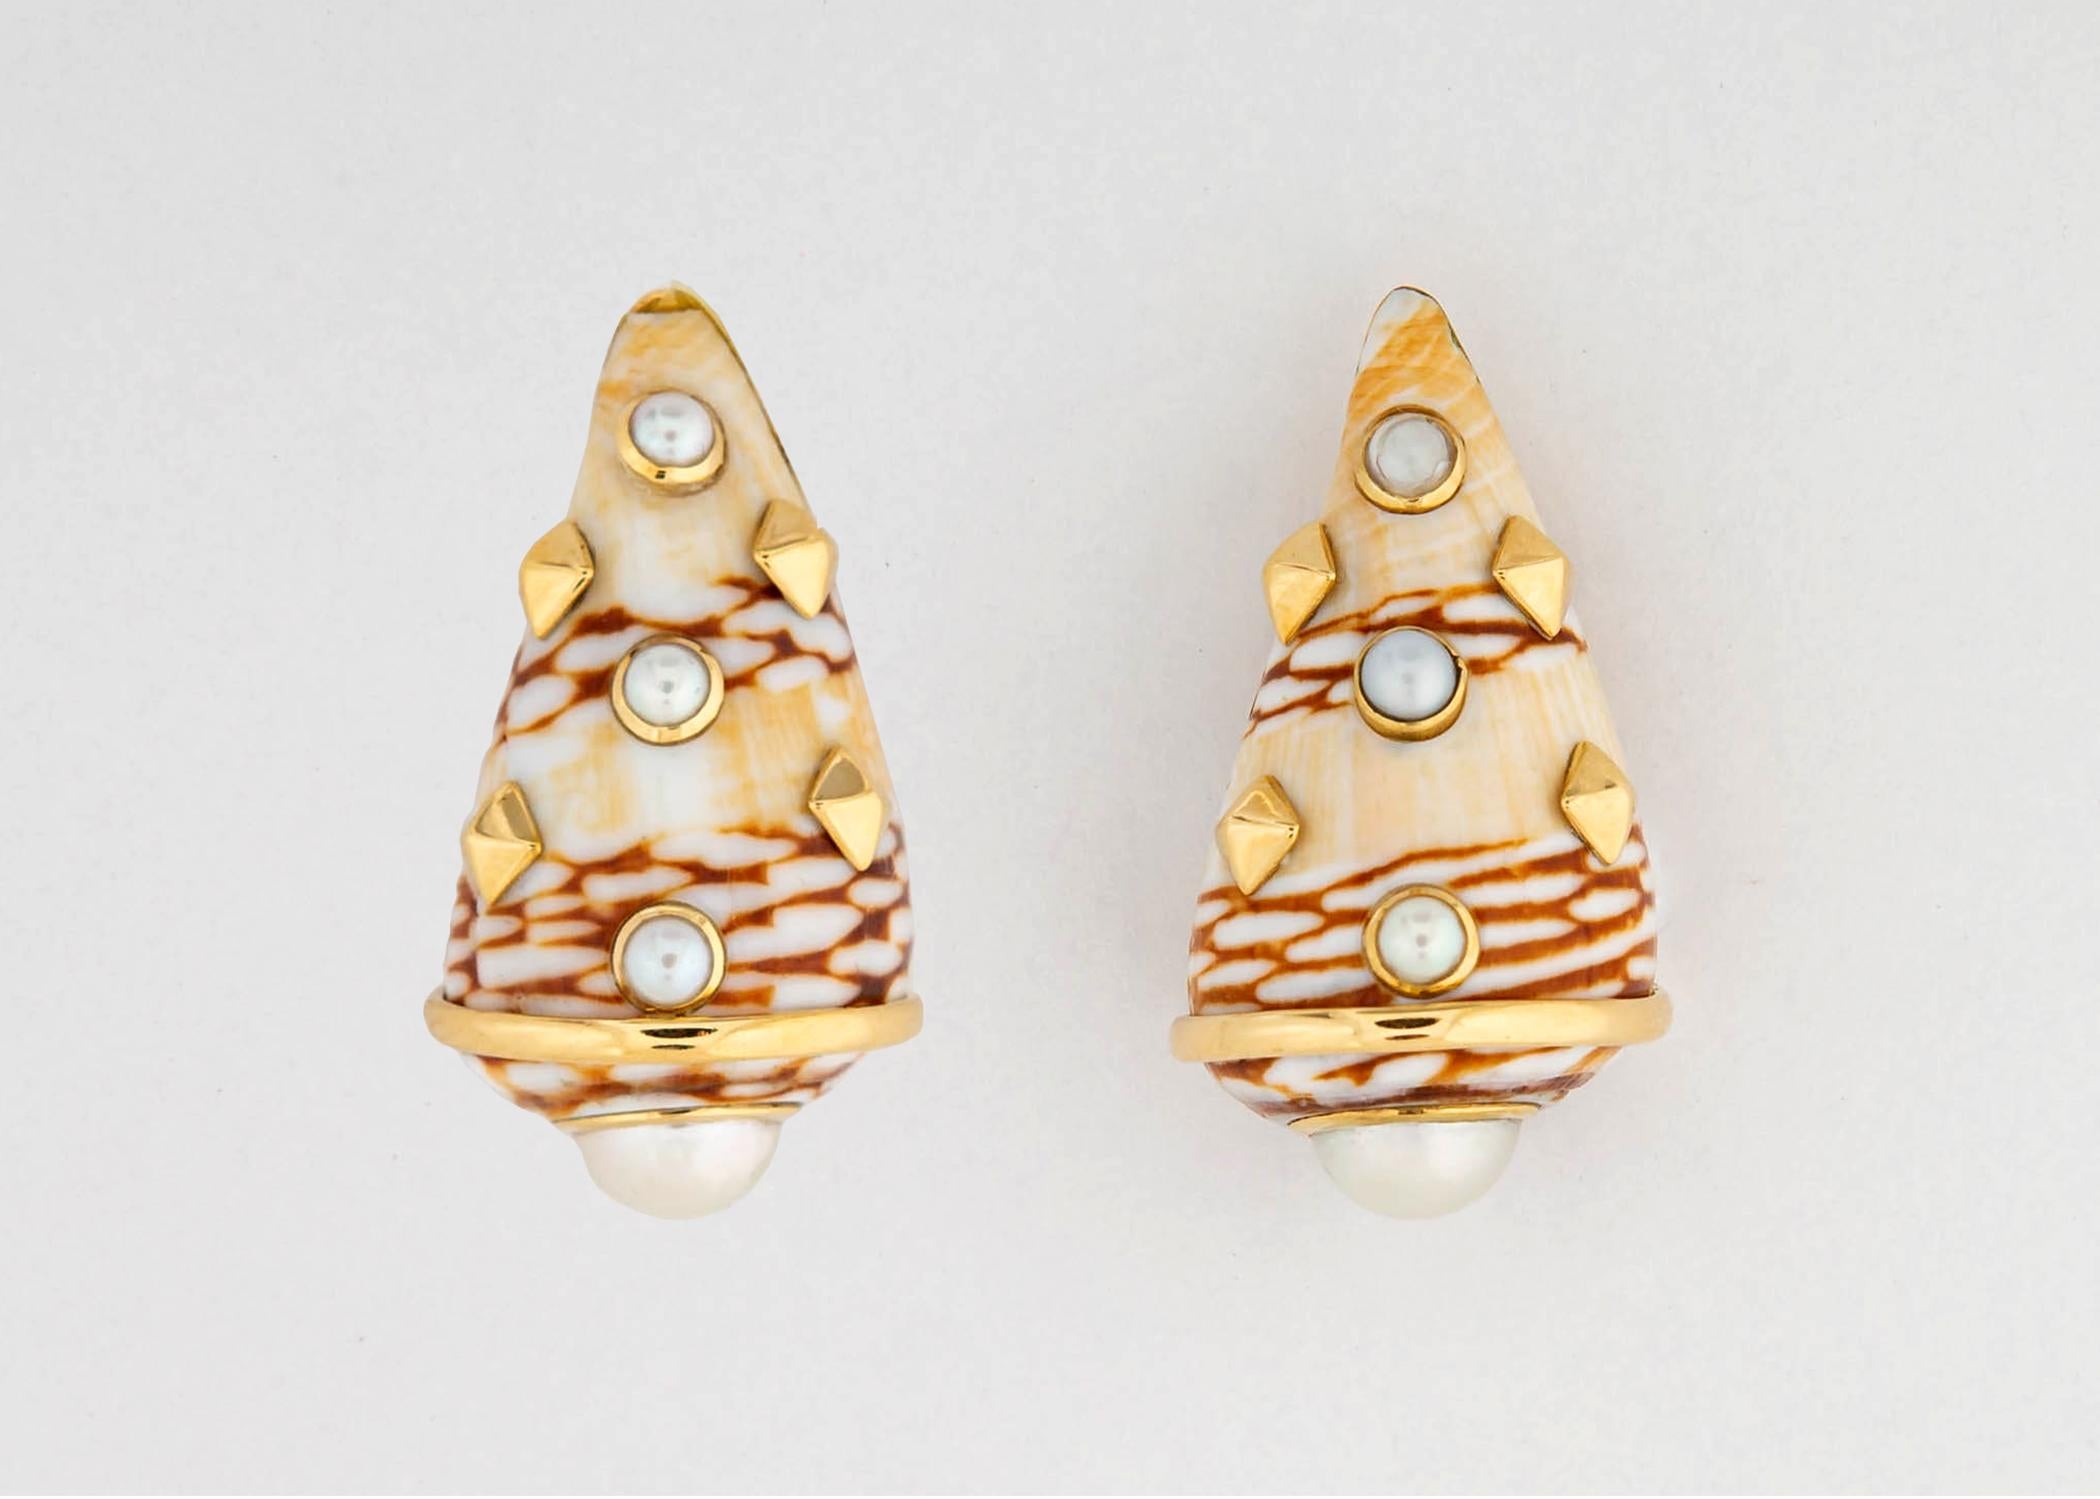 Trianon is famous for there natural shell earrings. This pair features carmel and beige colors accented with beautiful white pearls and 18k gold detailing. Almost 1 1/4 inches in length.